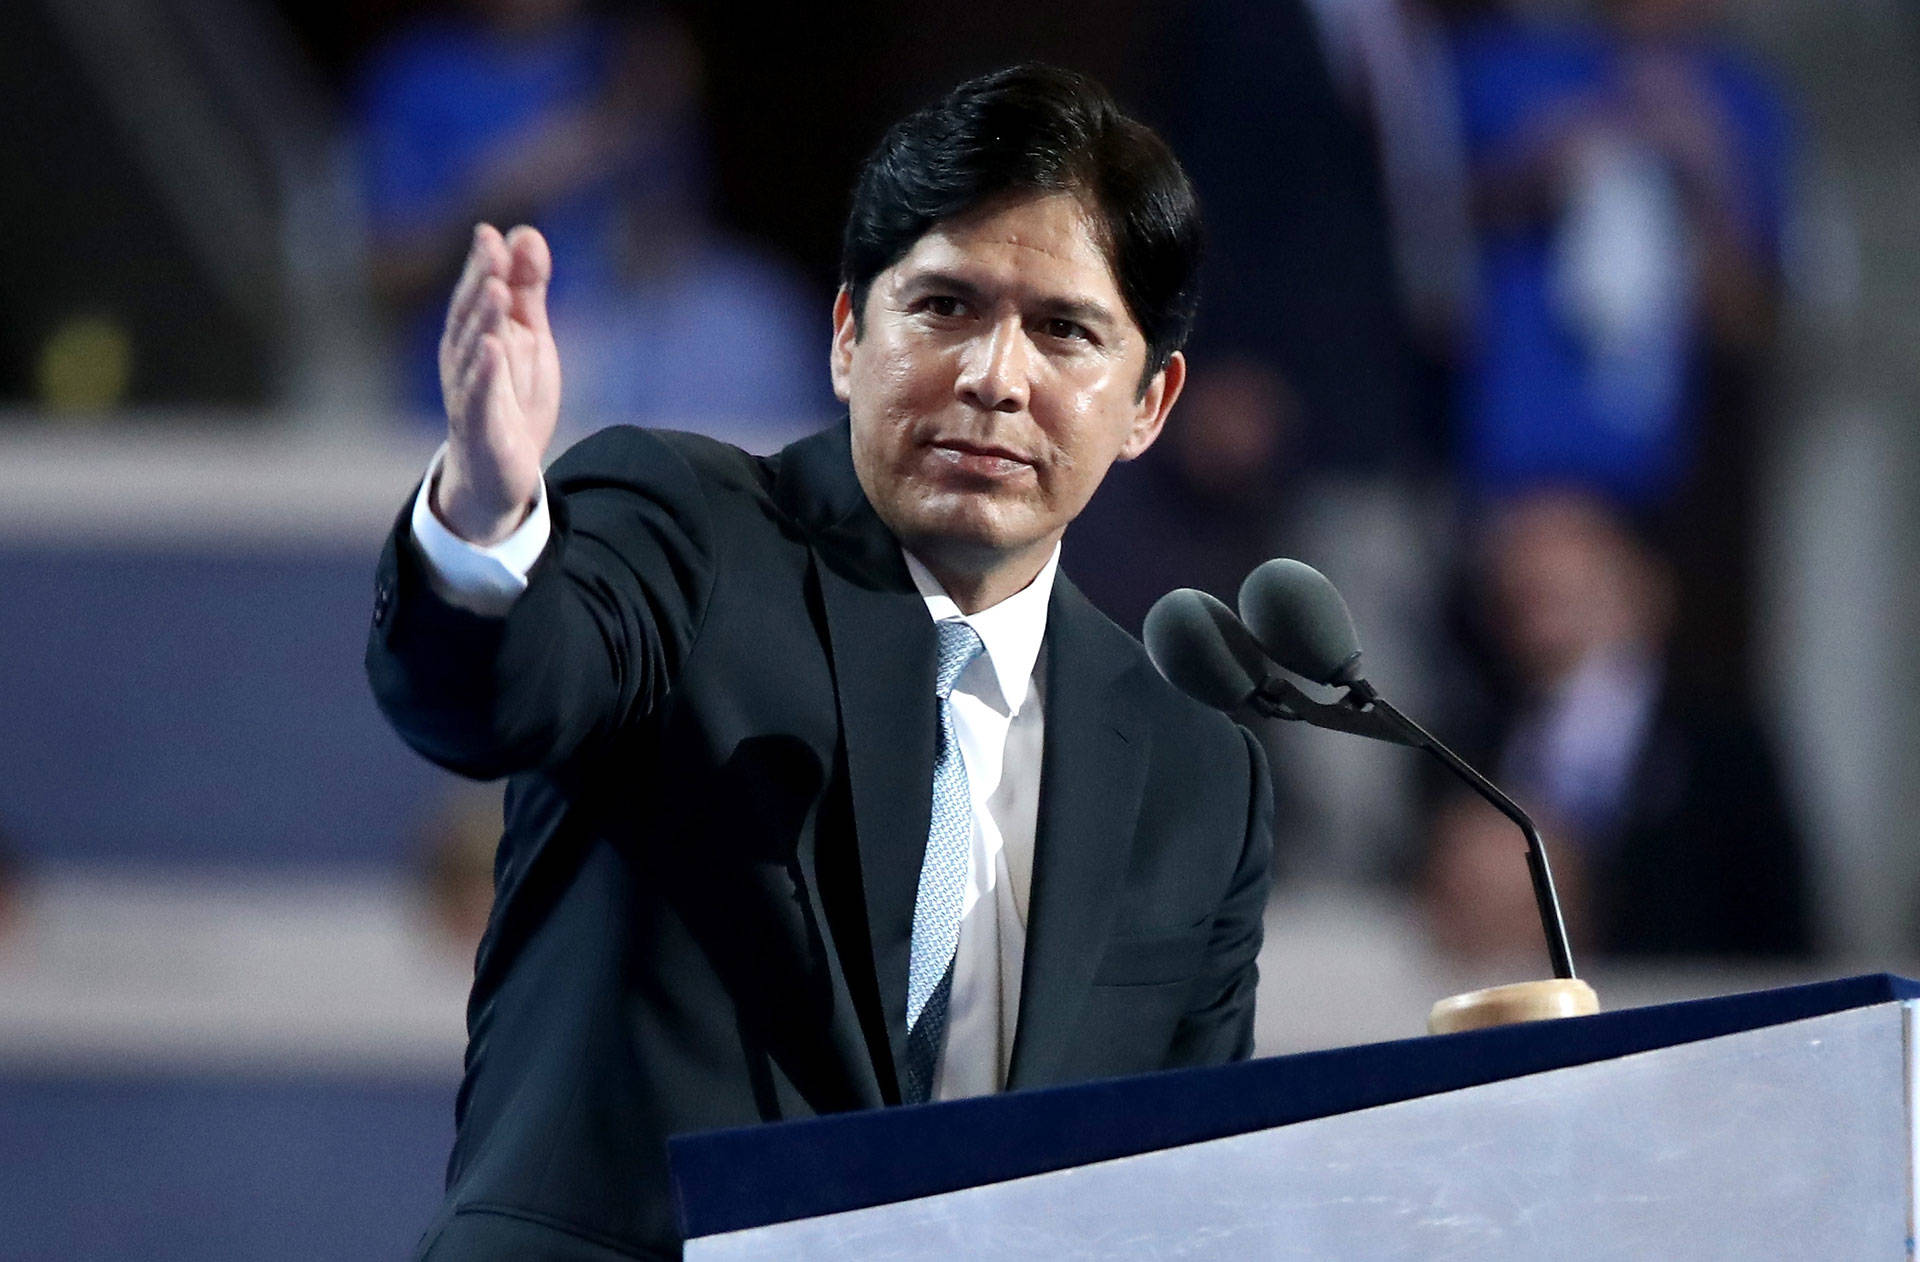 California State Sen. Kevin De León addresses the first day of the Democratic National Convention on July 25, 2016. Jessica Kourkounis/Getty Images